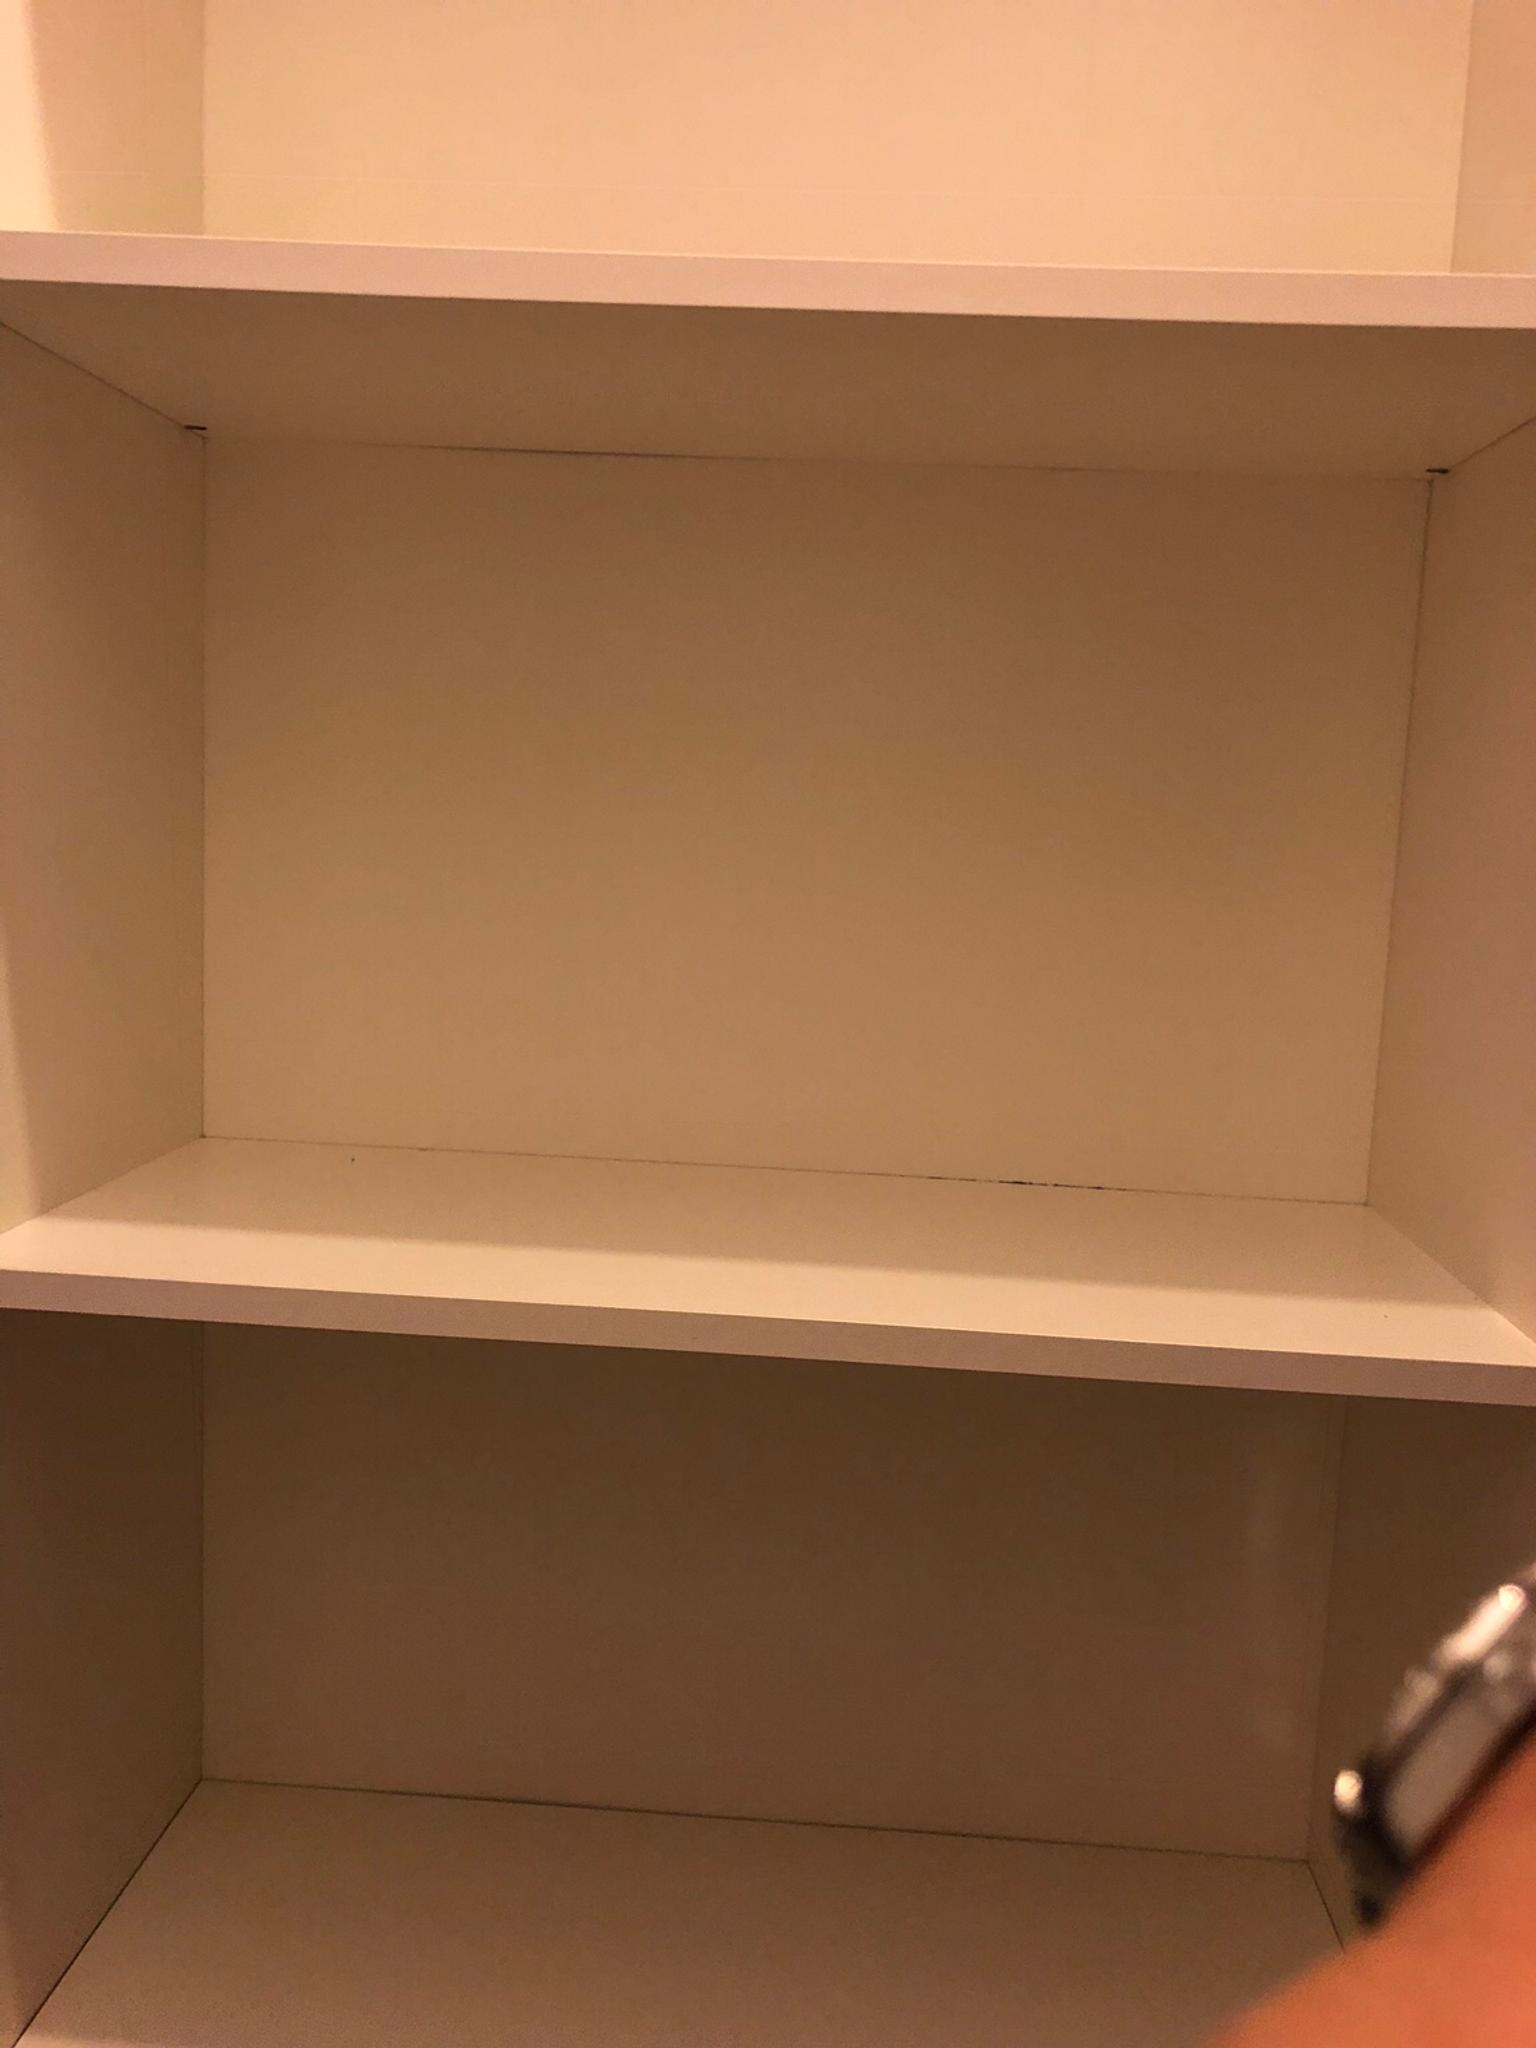 White Ikea Billy Bookcase In Ss15 Basildon For 8 00 For Sale Shpock